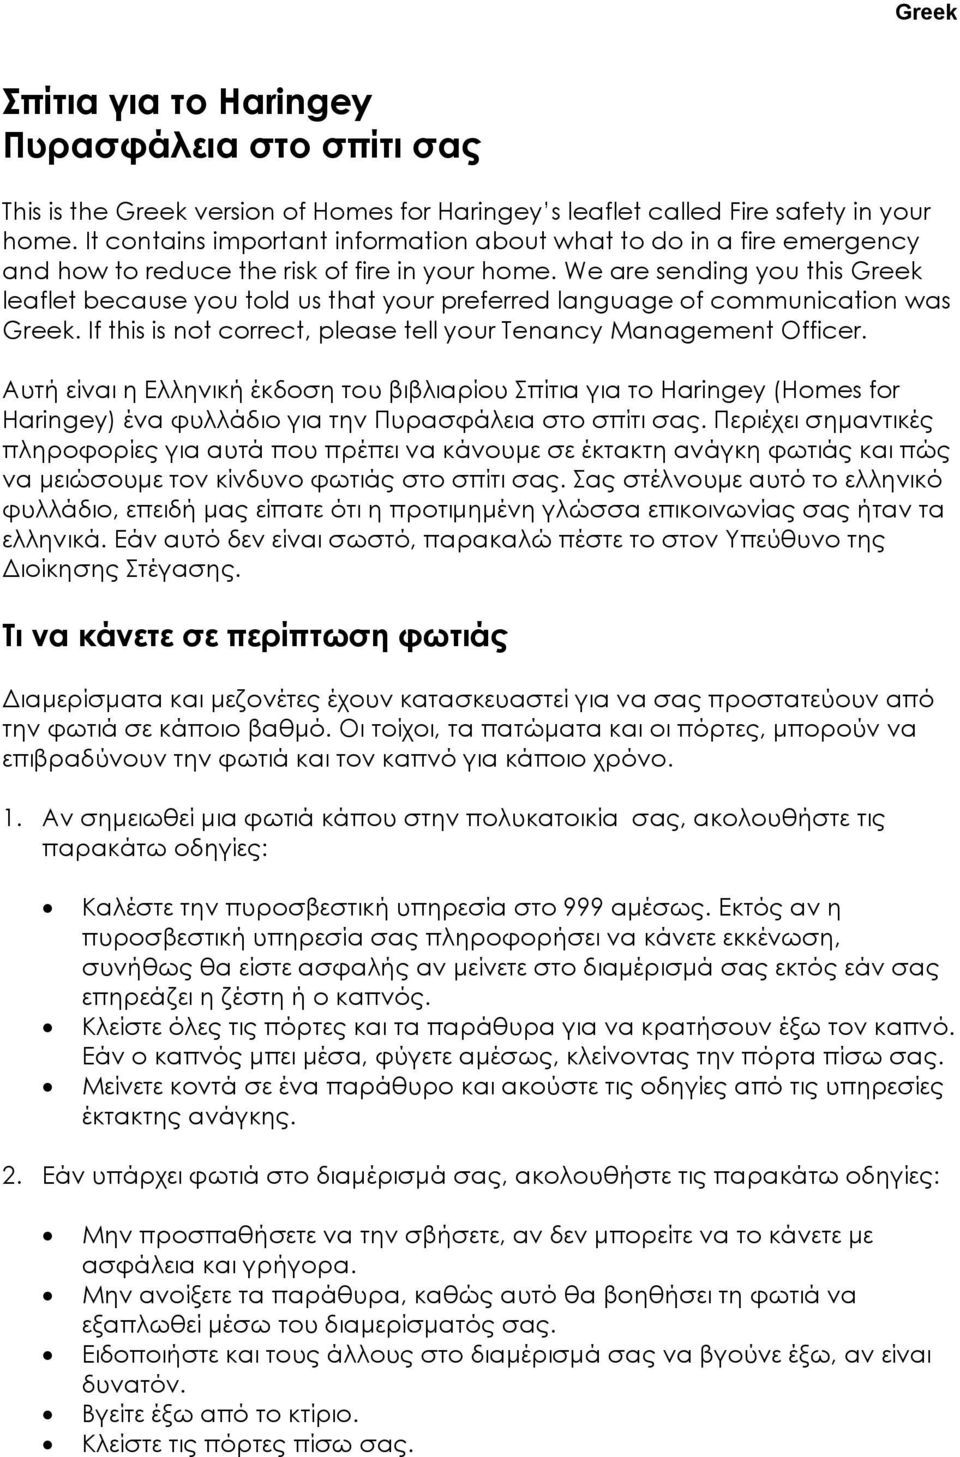 We are sending you this Greek leaflet because you told us that your preferred language of communication was Greek. If this is not correct, please tell your Tenancy Management Officer.